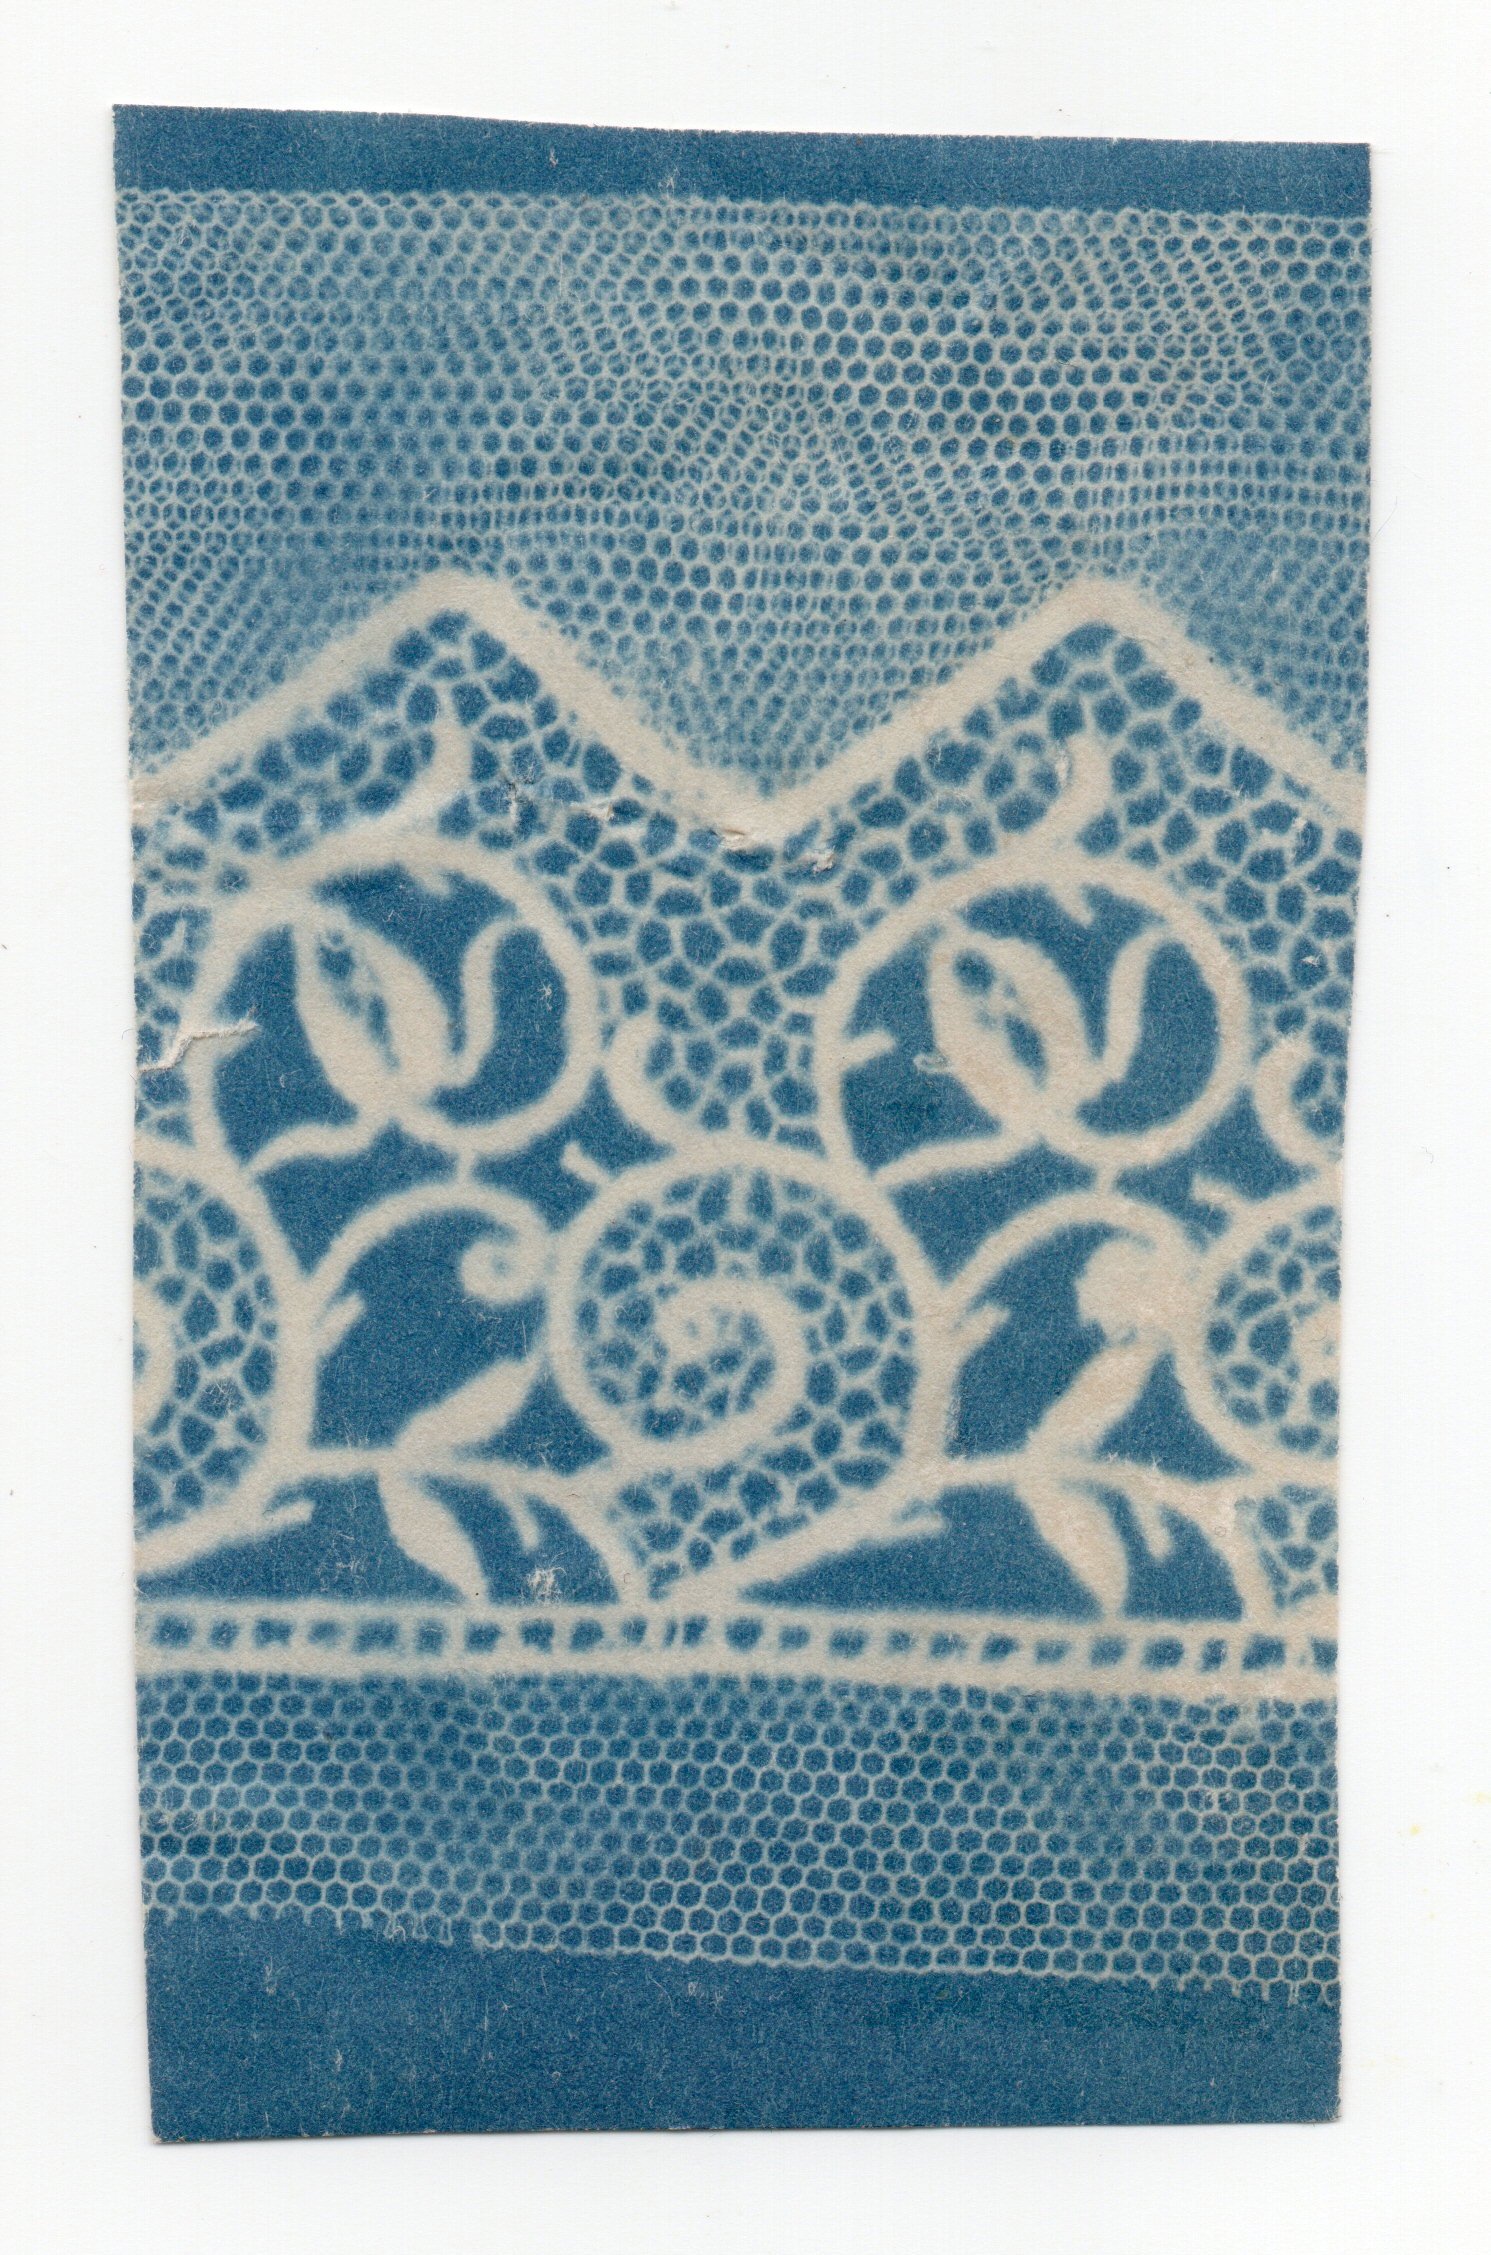 Image of Anonyme: cyanotype photogram of lace, ca. 1900